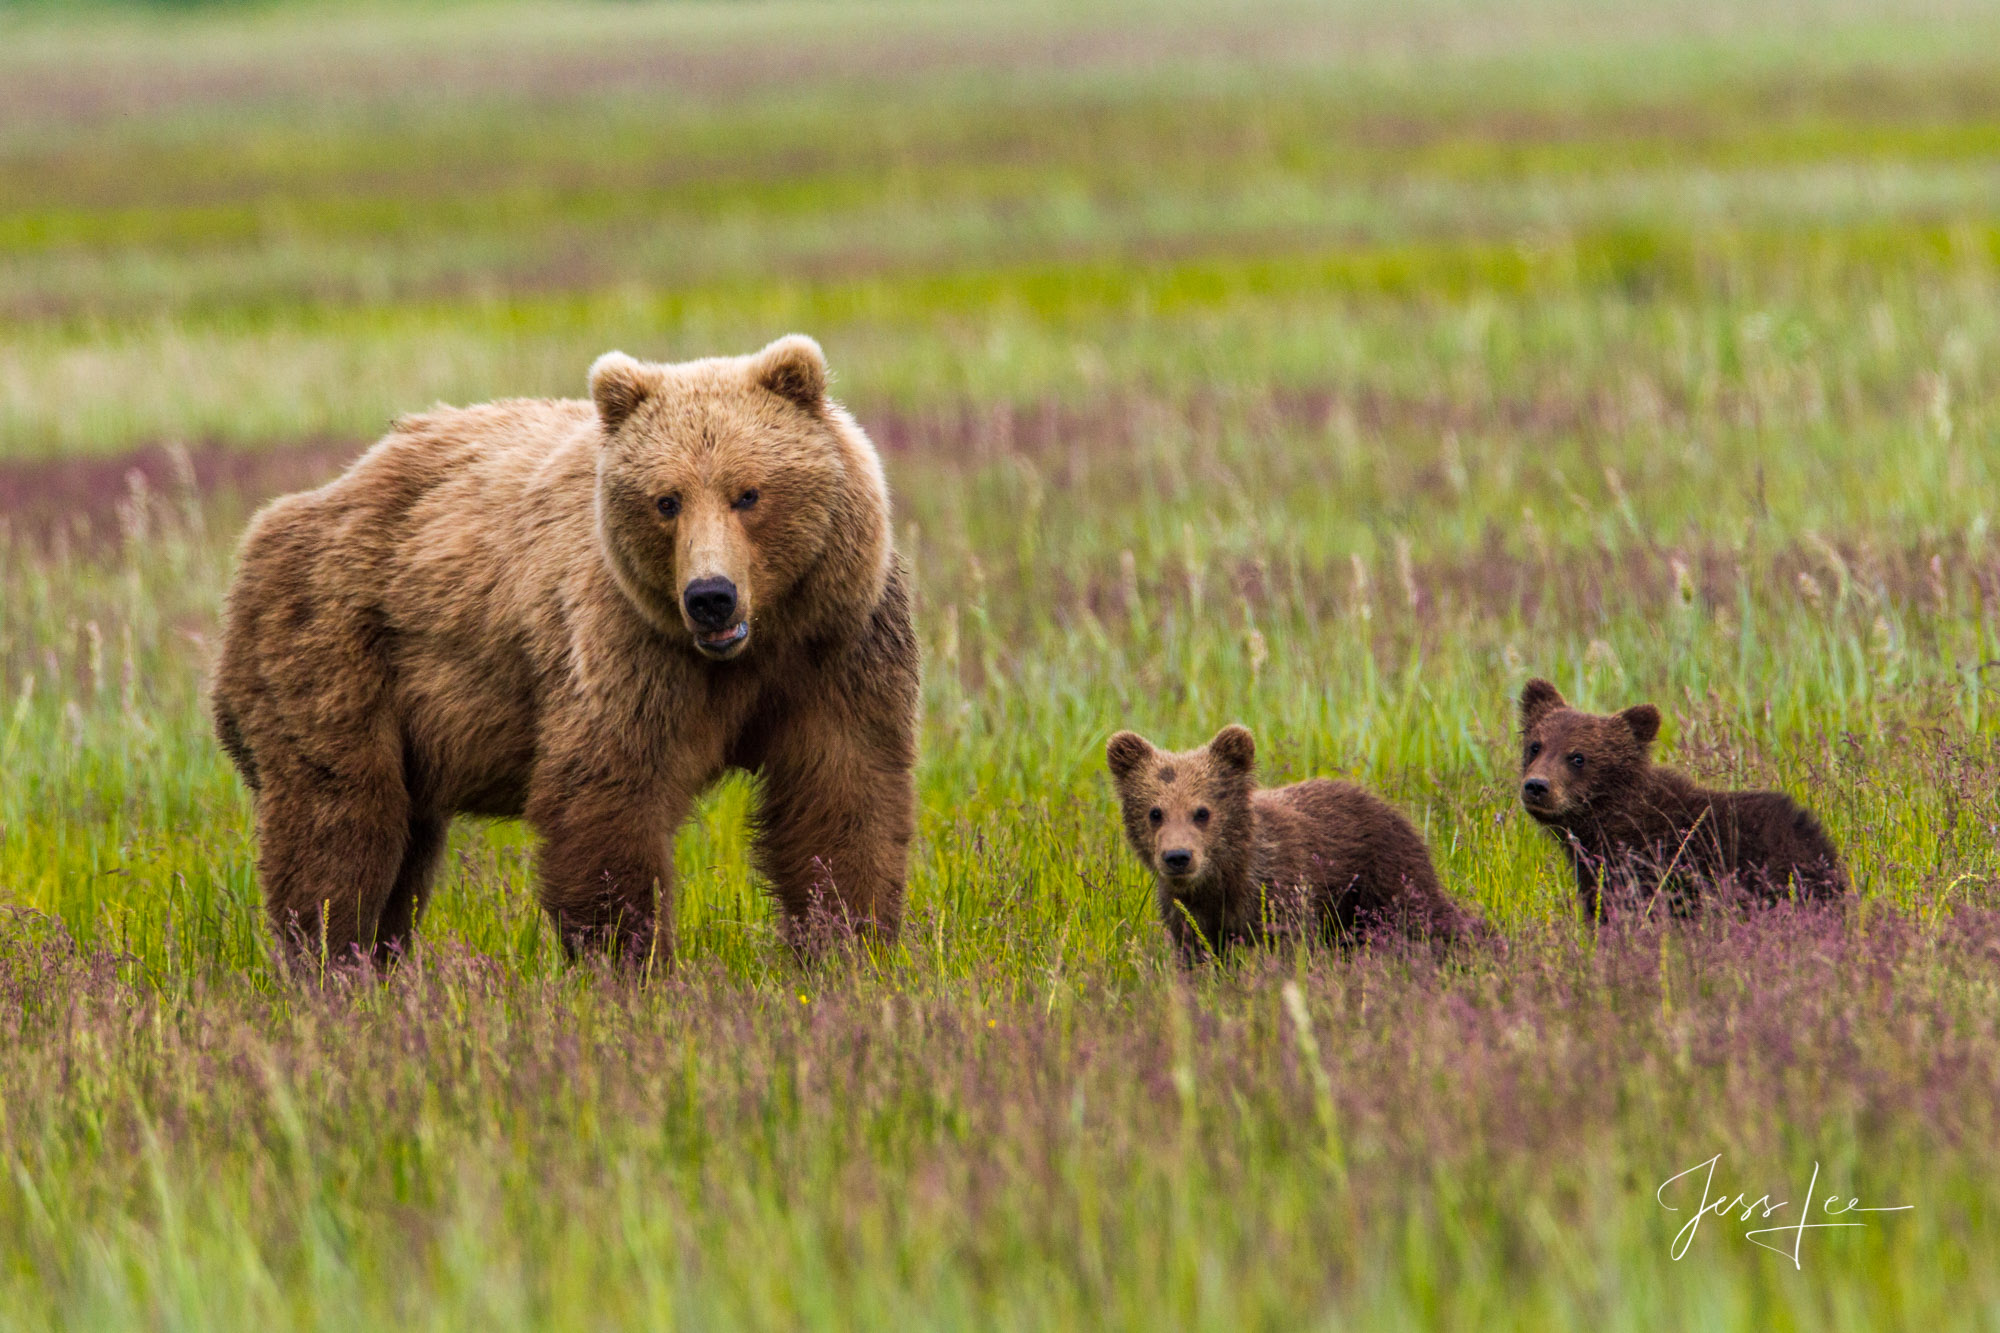 Two Cub Grizzlies and mom a Limited edition of 800 prints. These Grizzly bear fine art wildlife photographs are offered as high...